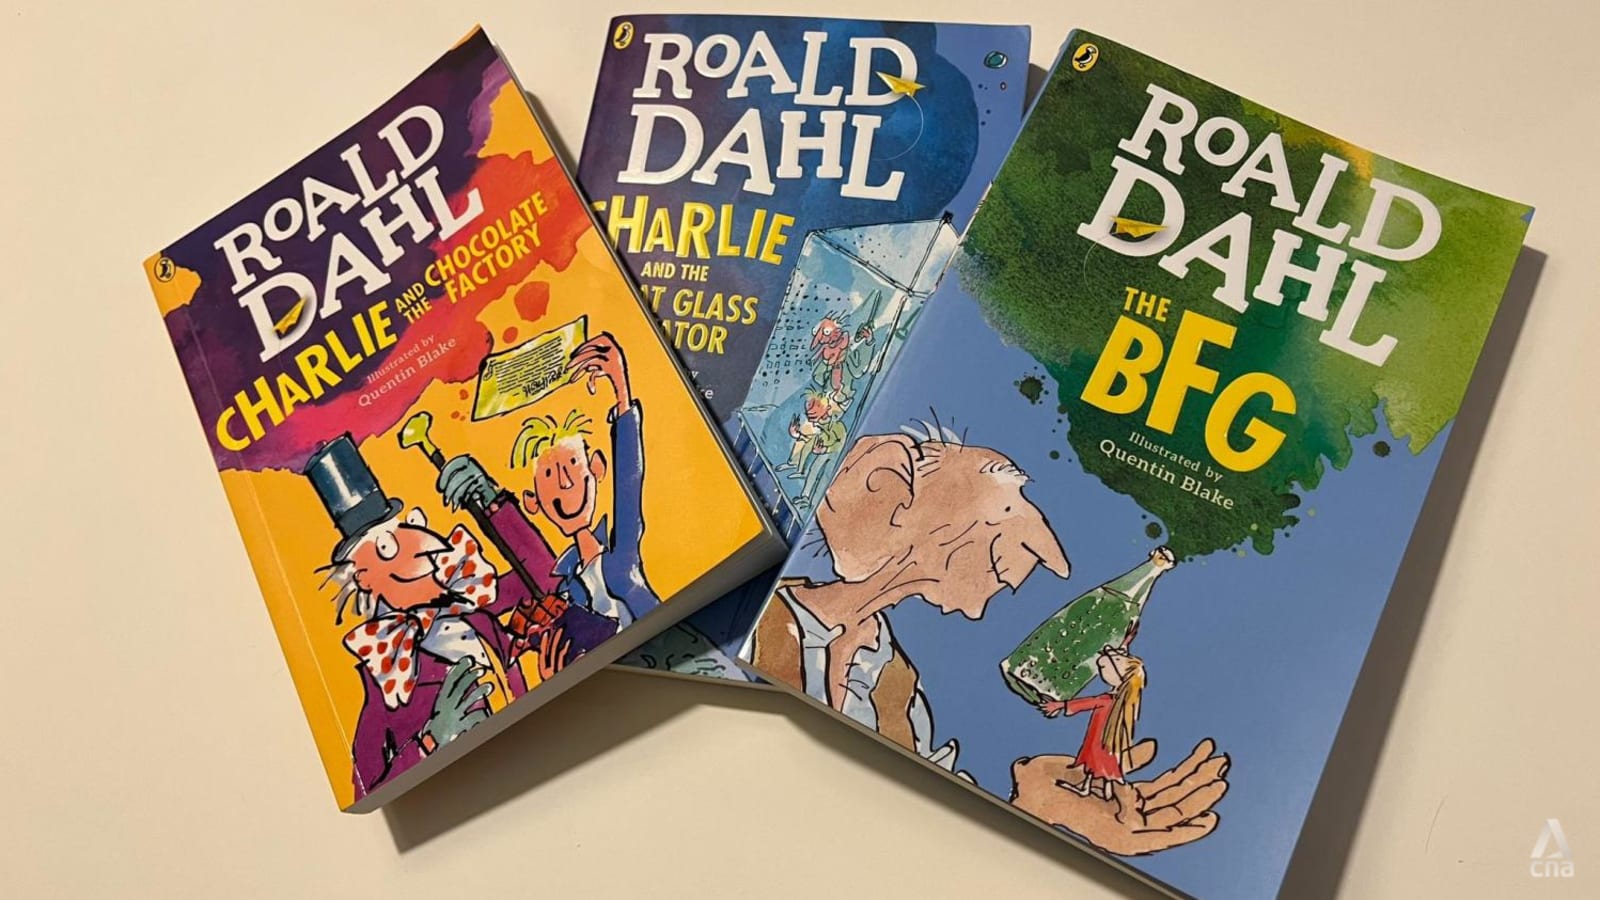 non-merci,-say-roald-dahl's-french-publishers-to-rewrites